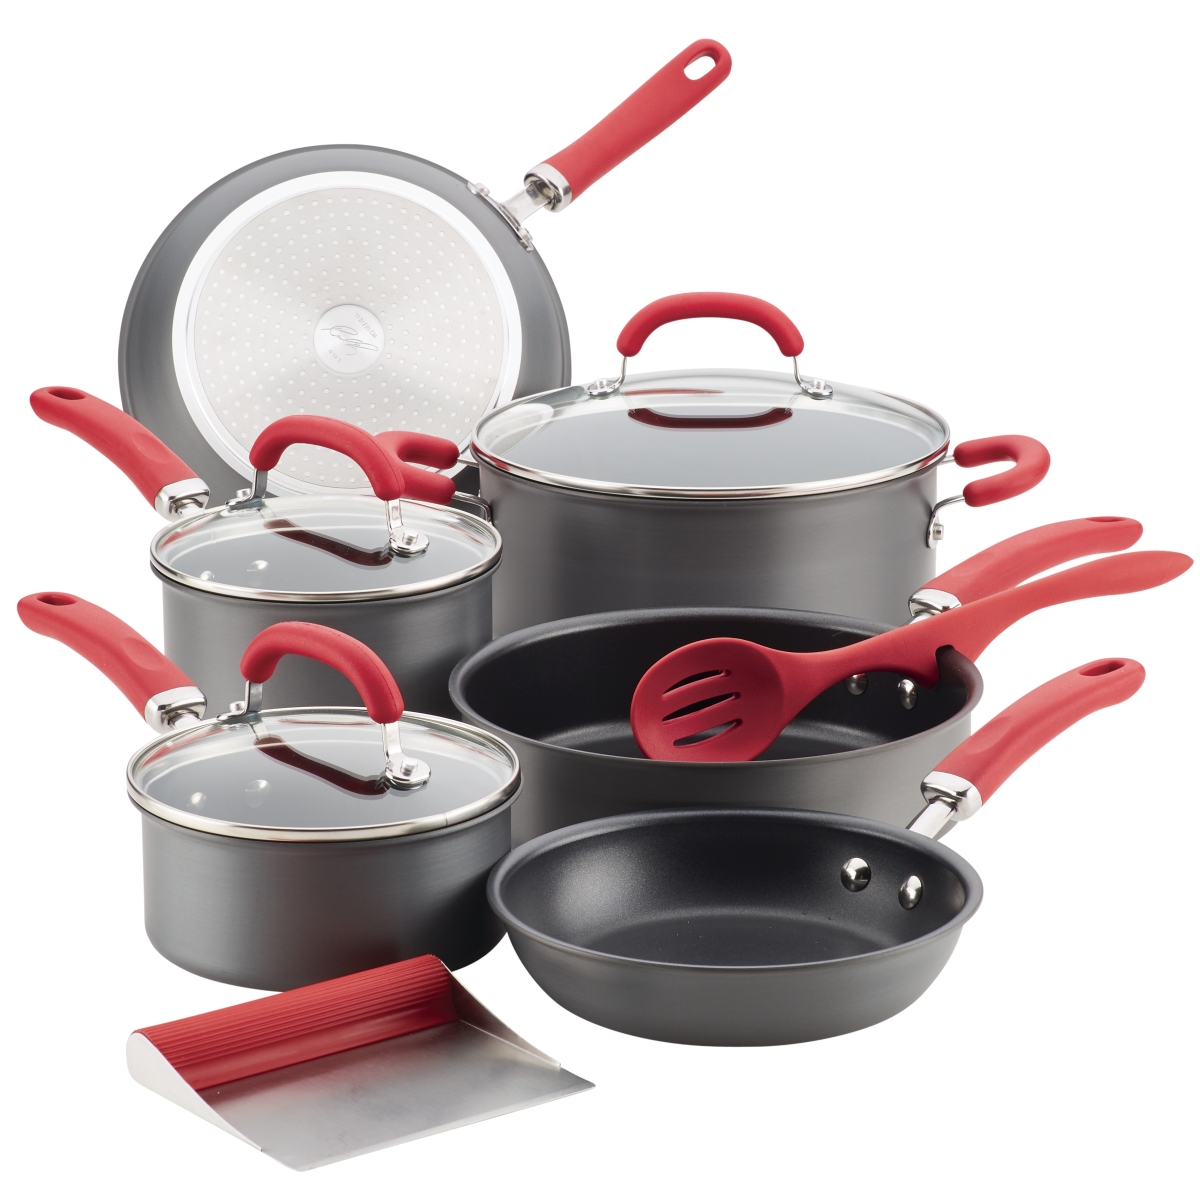 Picture of Rachael Ray 81157 Create Delicious Hard-Anodized Aluminum Nonstick Cookware Set - Red Handles, 11 Piece